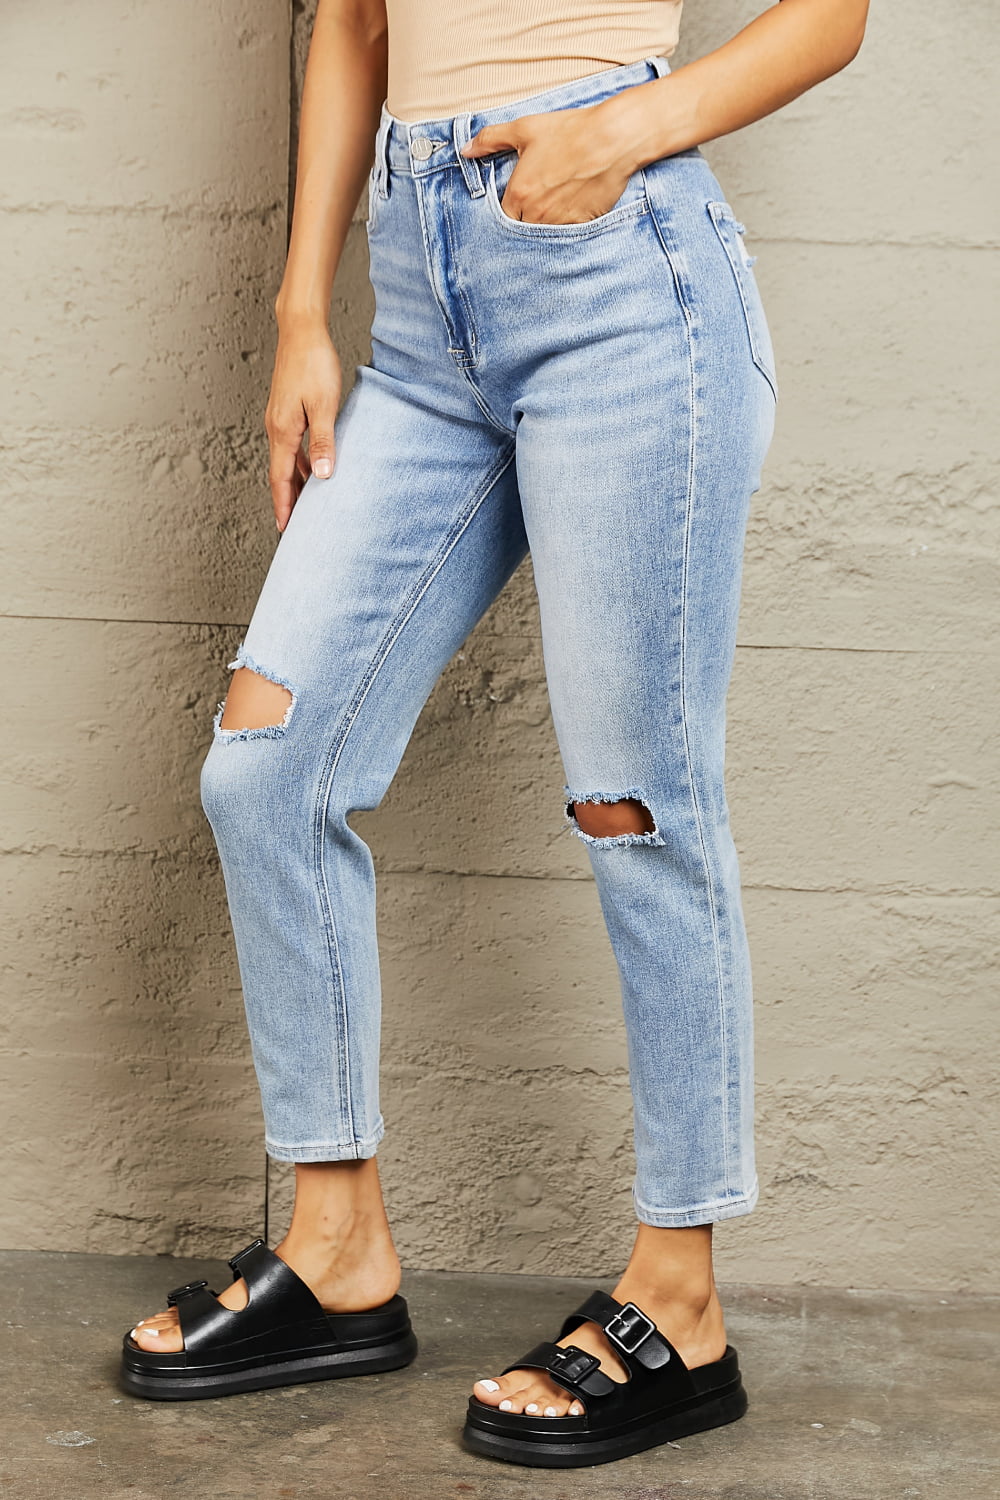 BAYEAS High Waisted Distressed Slim Cropped Jeans - Alonna's Legging Land